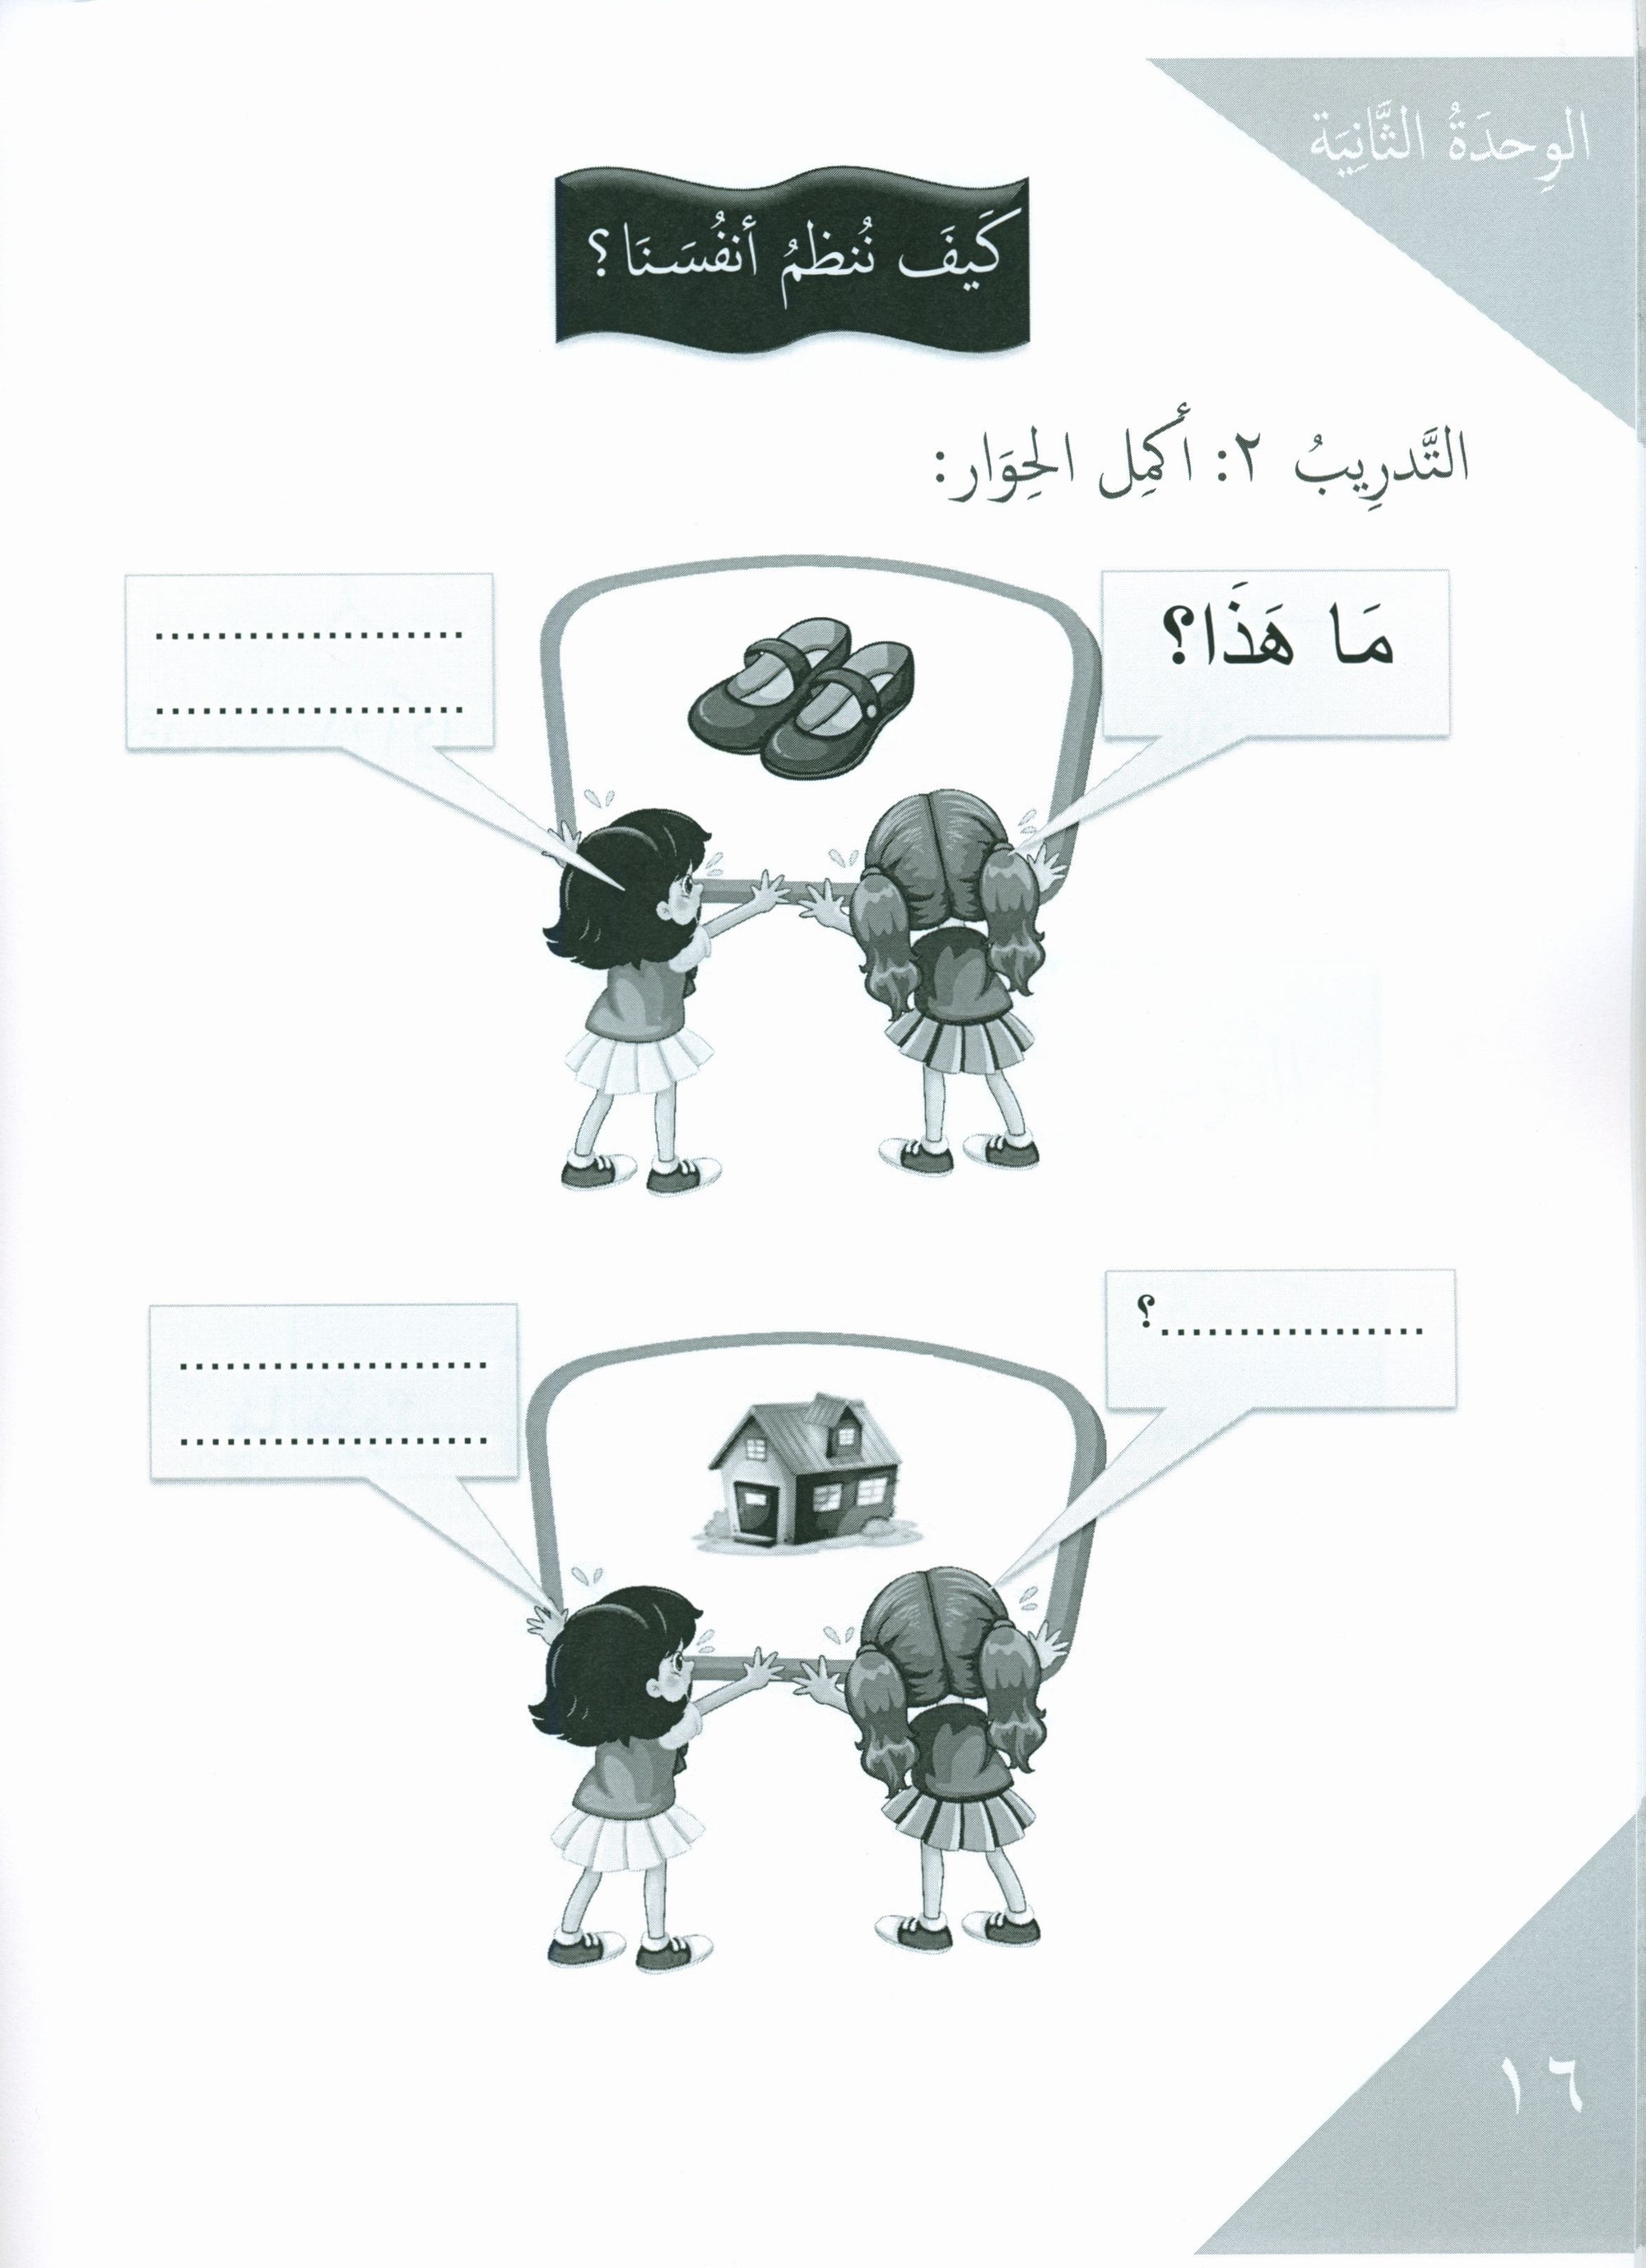 Our Language Is Our Pride Practice Level 1 لغتنا فخرنا